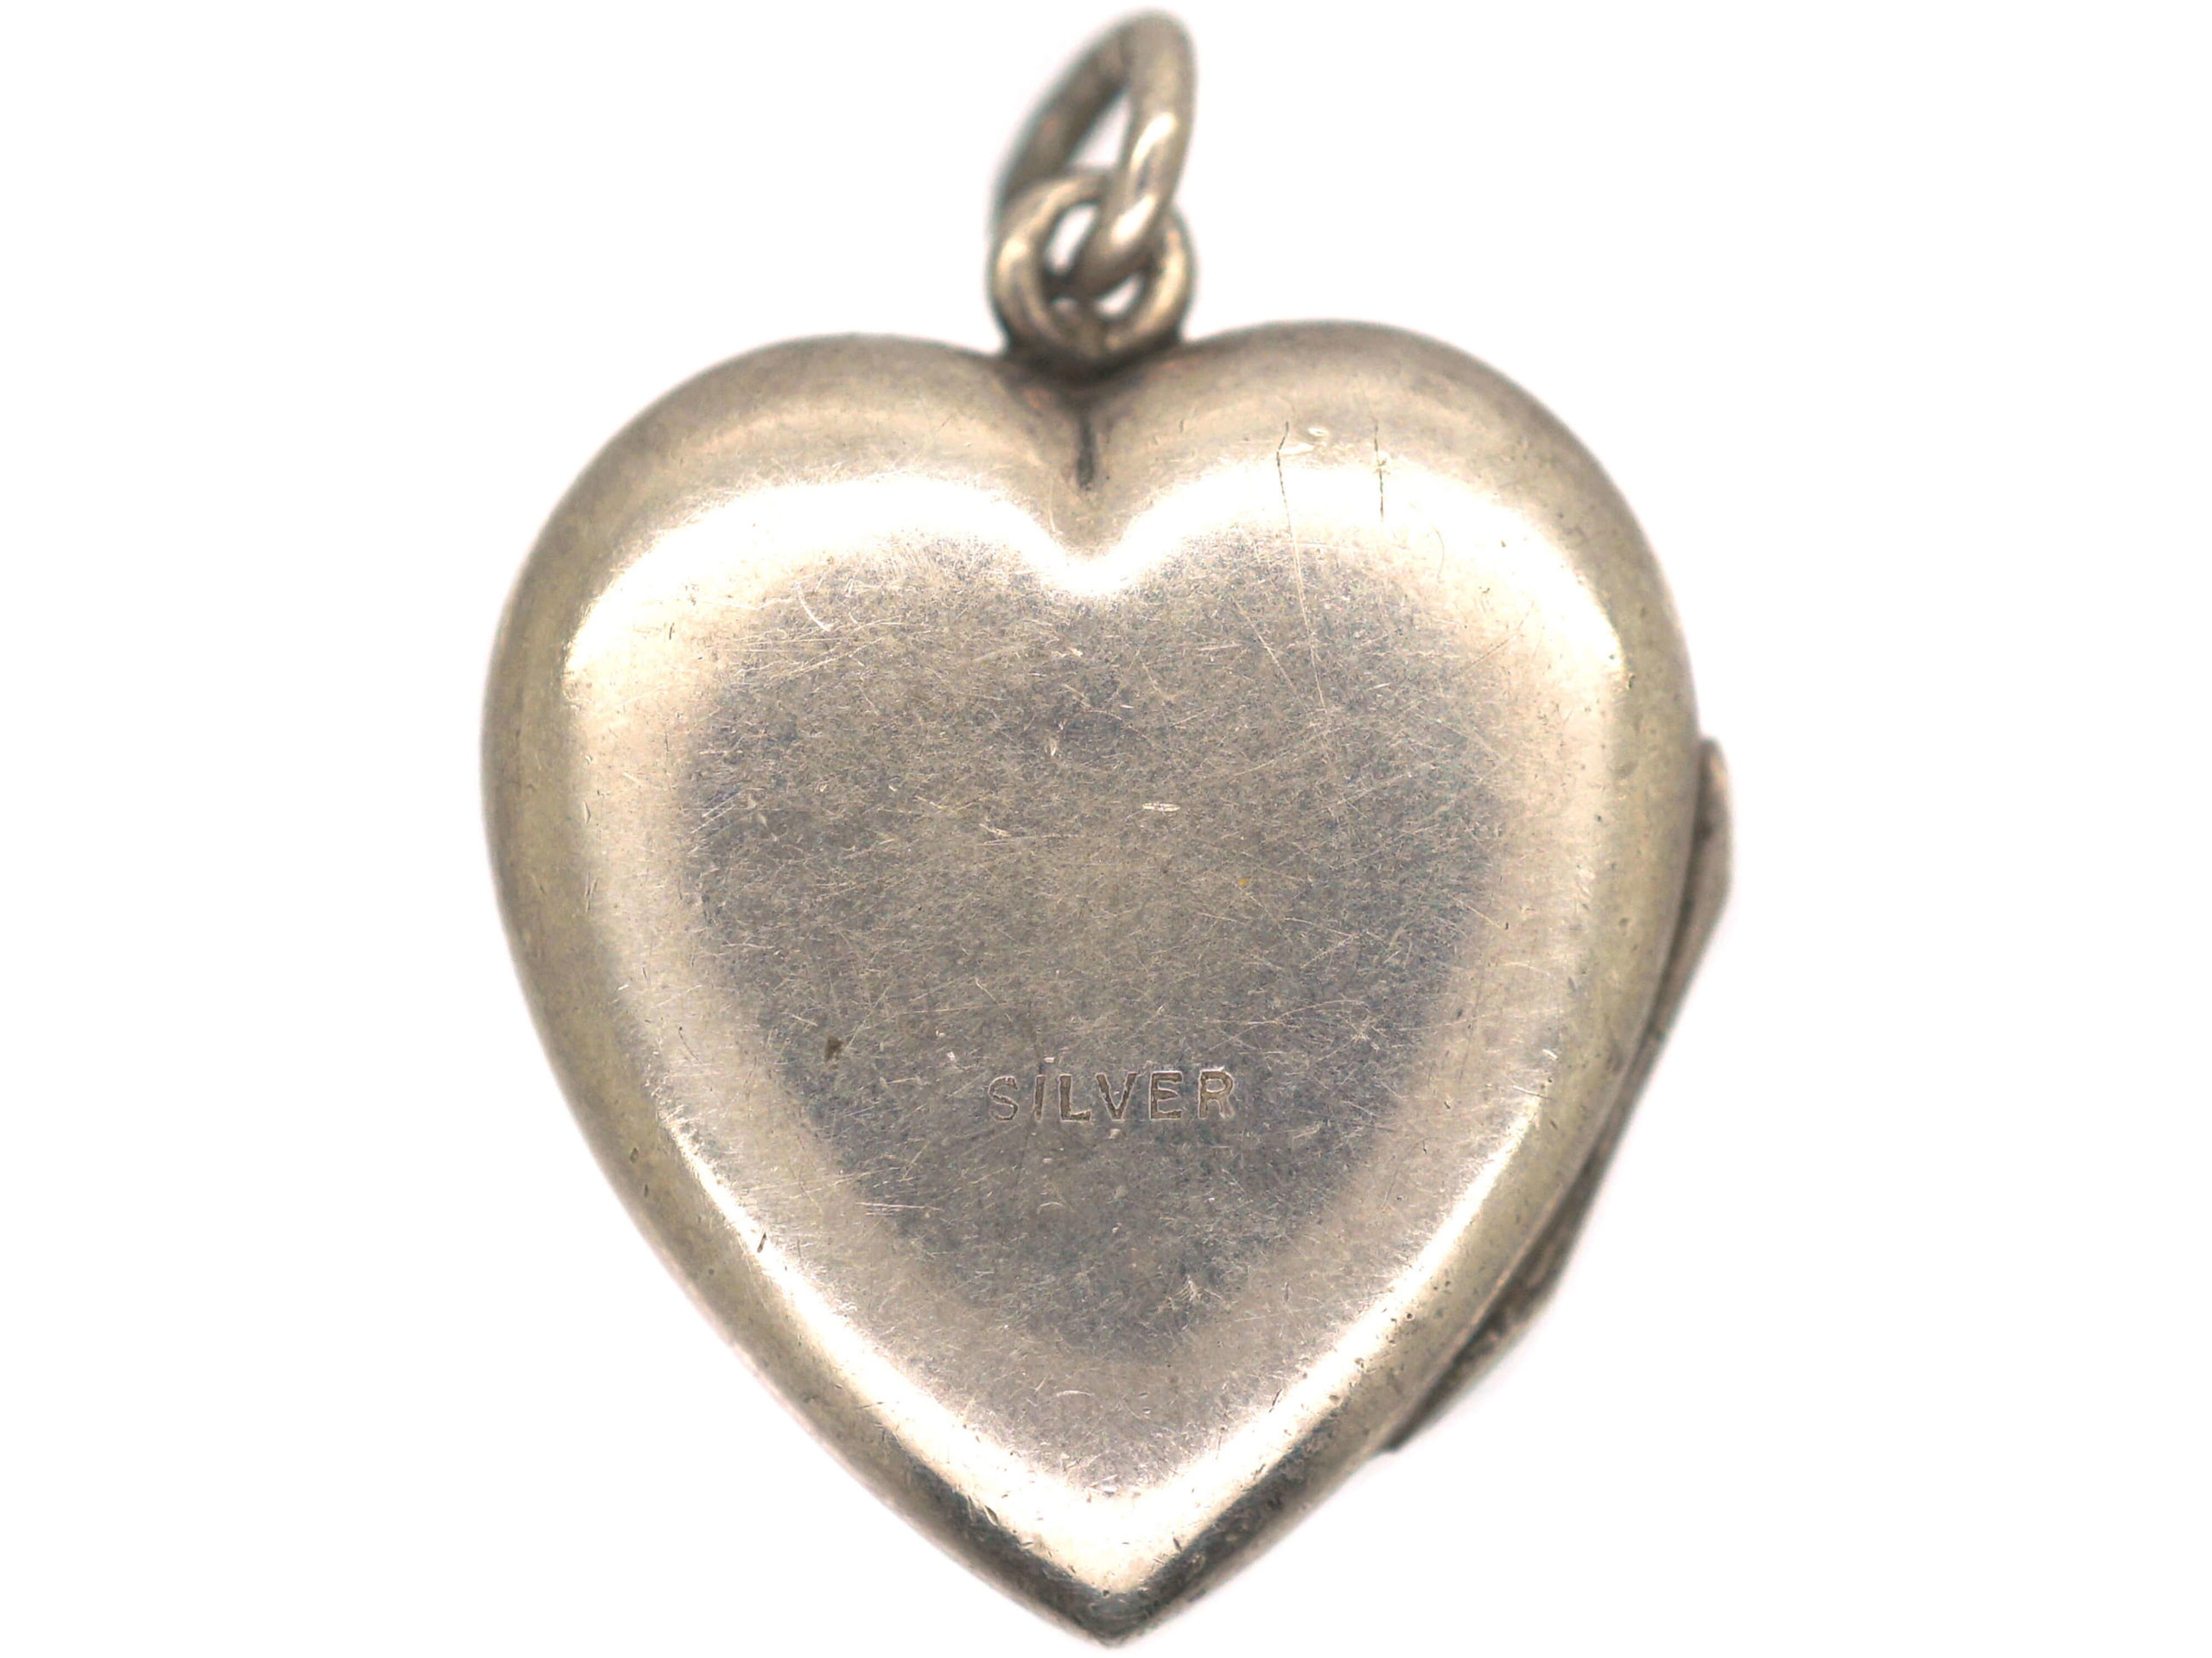 Silver Heart Shaped Locket with Engraved Leaf Motif (749P) | The ...